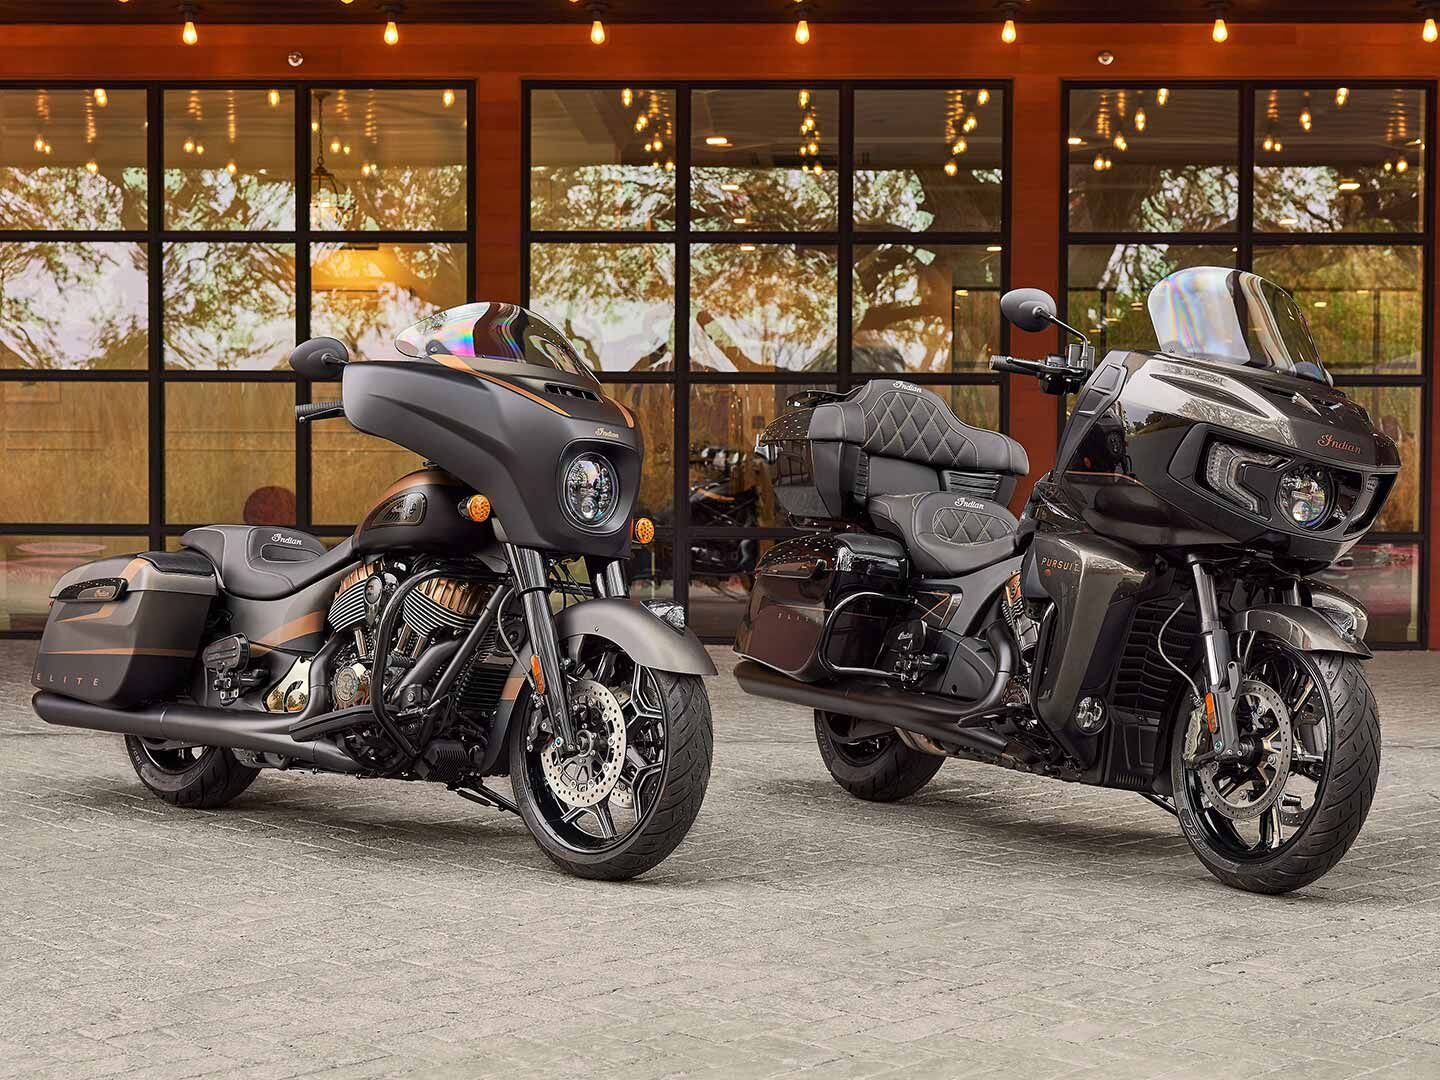 Indian has just announced the new Pursuit Elite tourer, which will join the Chieftain Elite in the brand’s premium lineup for 2023.